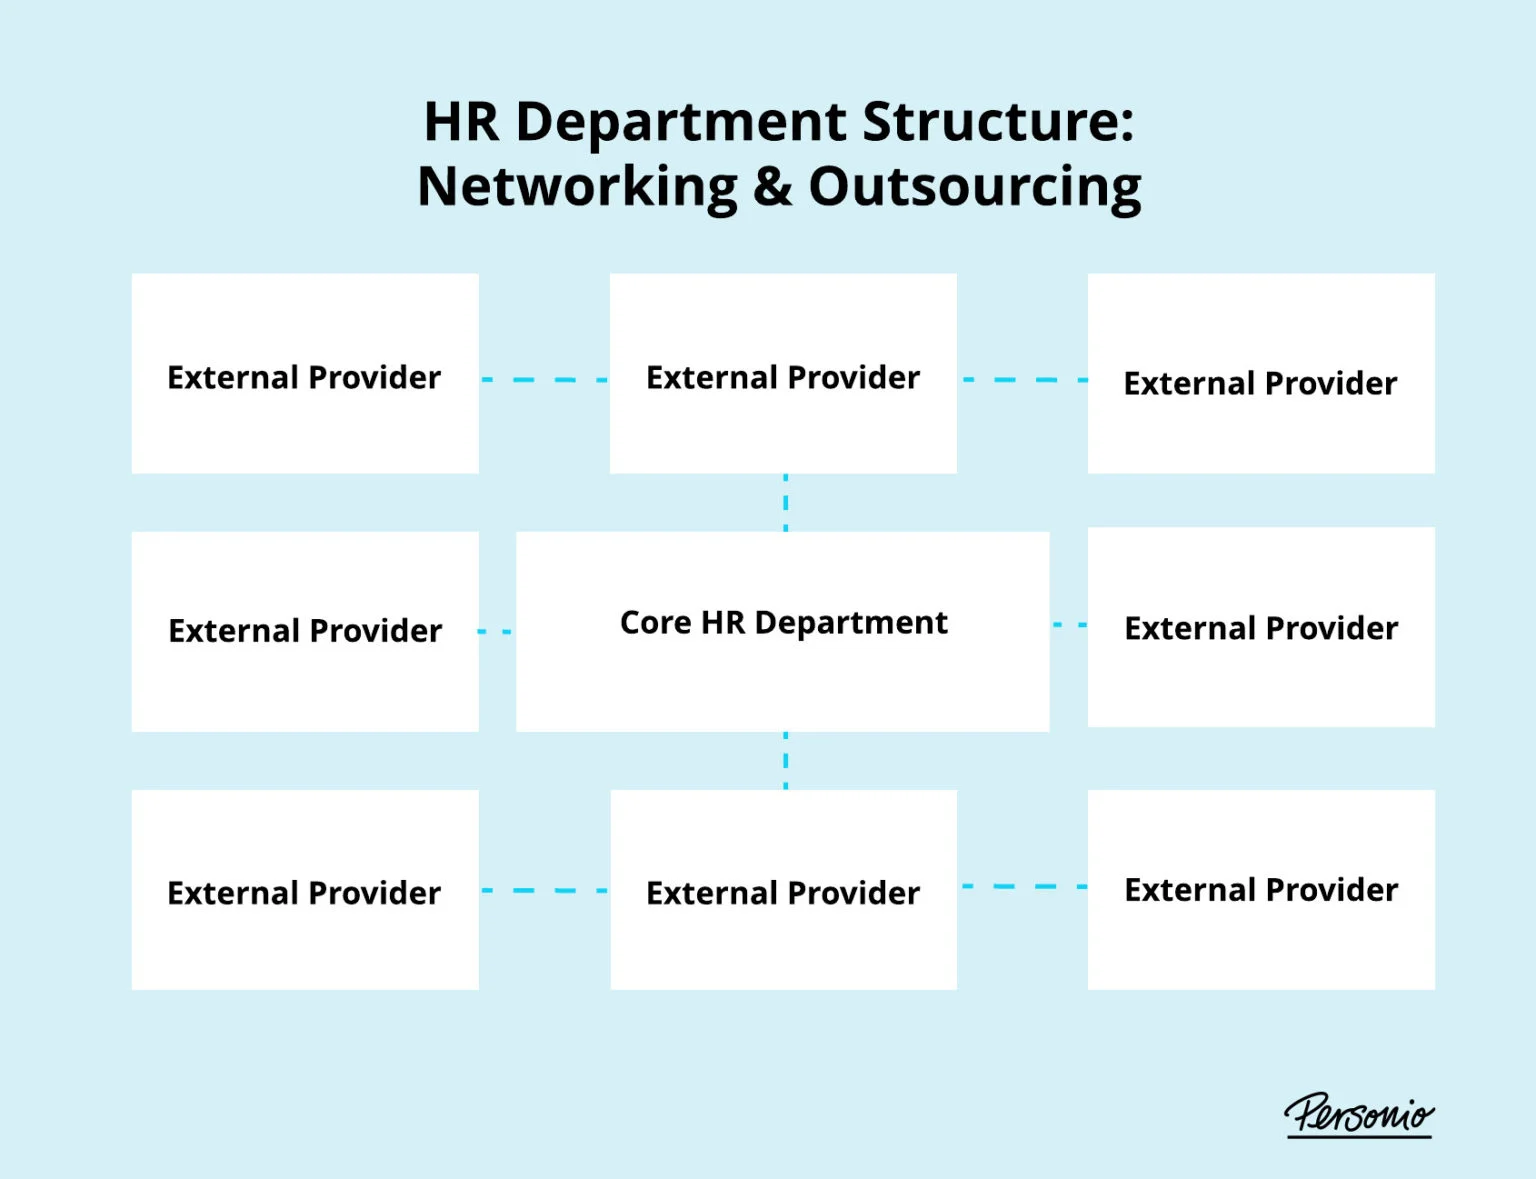 networking and outsourcing - hr department structure